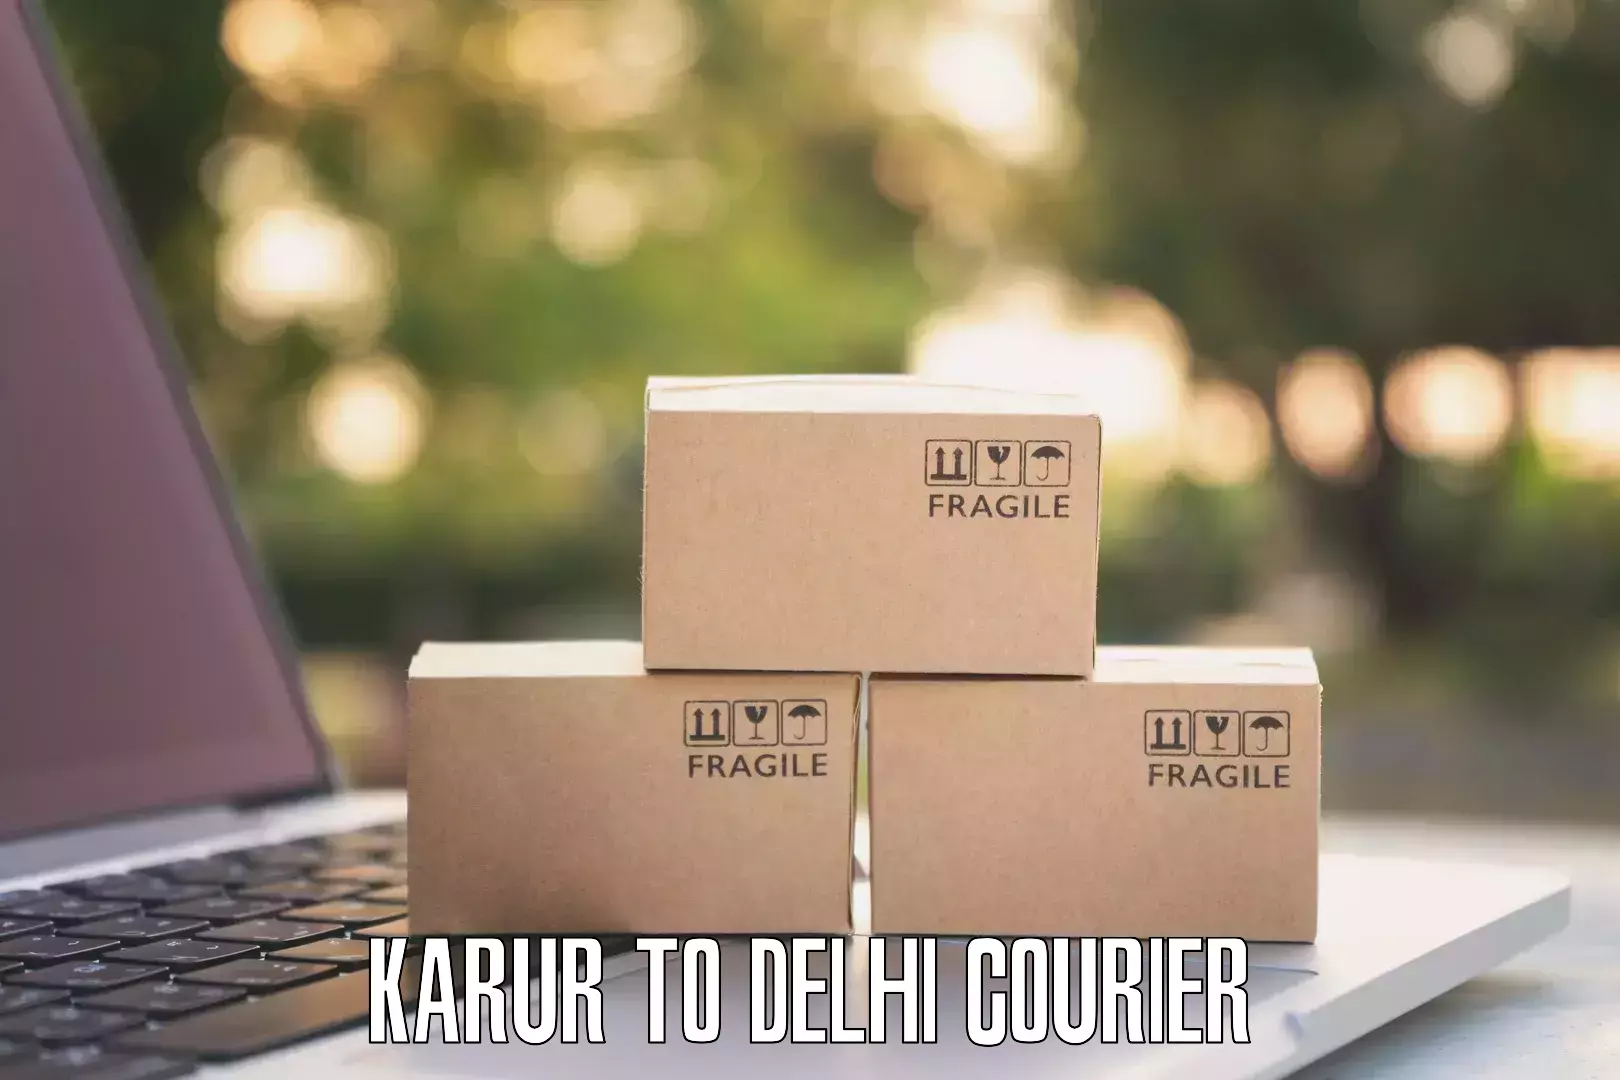 Fast delivery service Karur to Lodhi Road